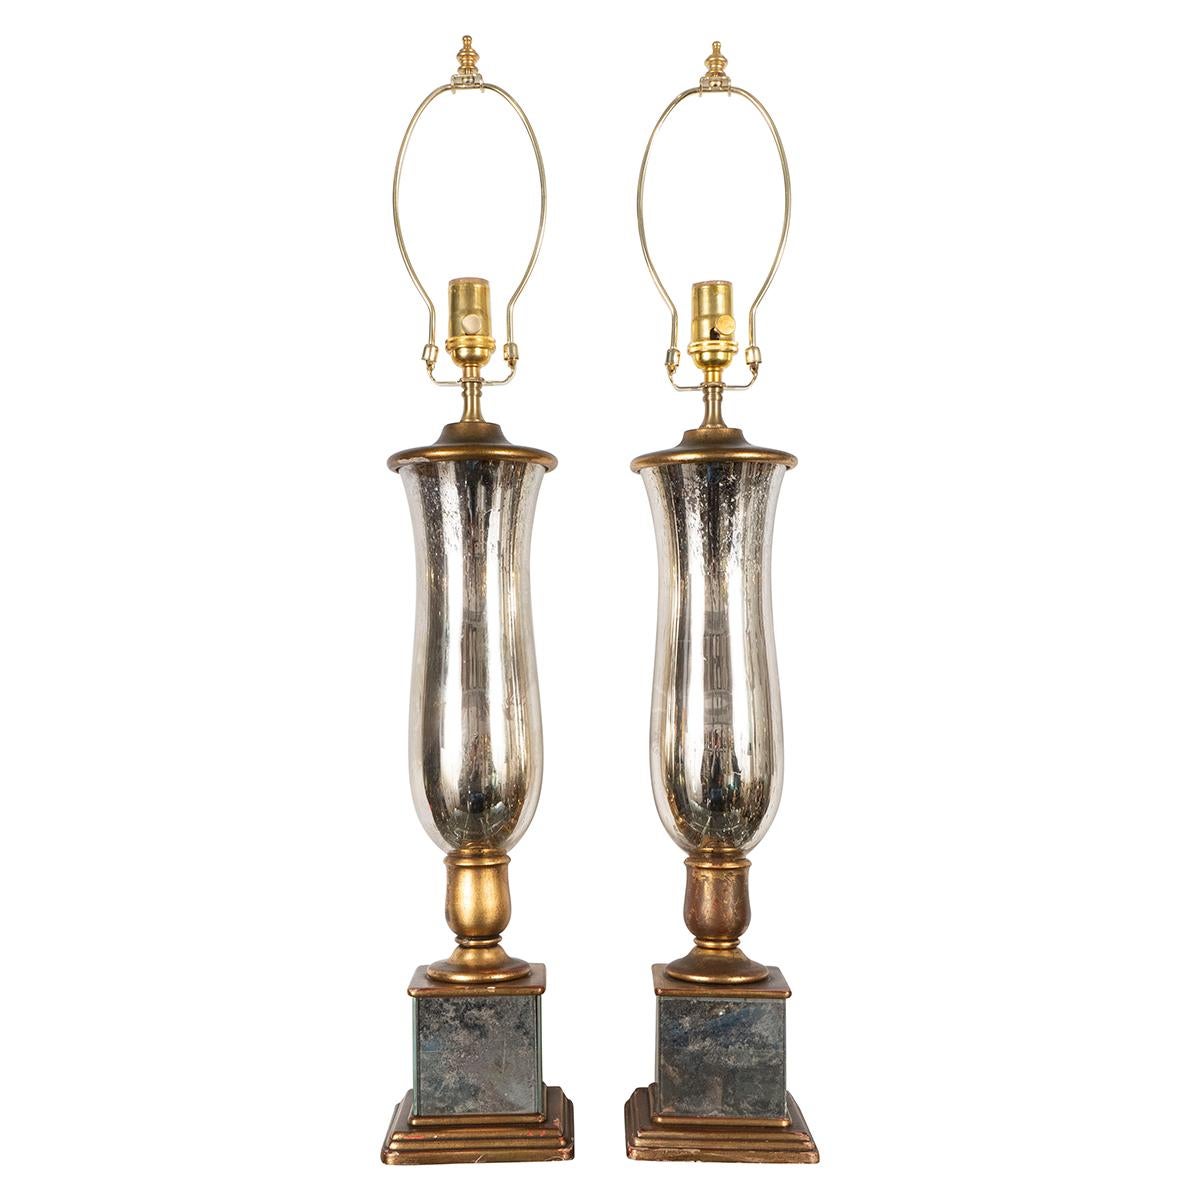 Pair of urn-shaped mercury glass lamps on mirror plinth bases.